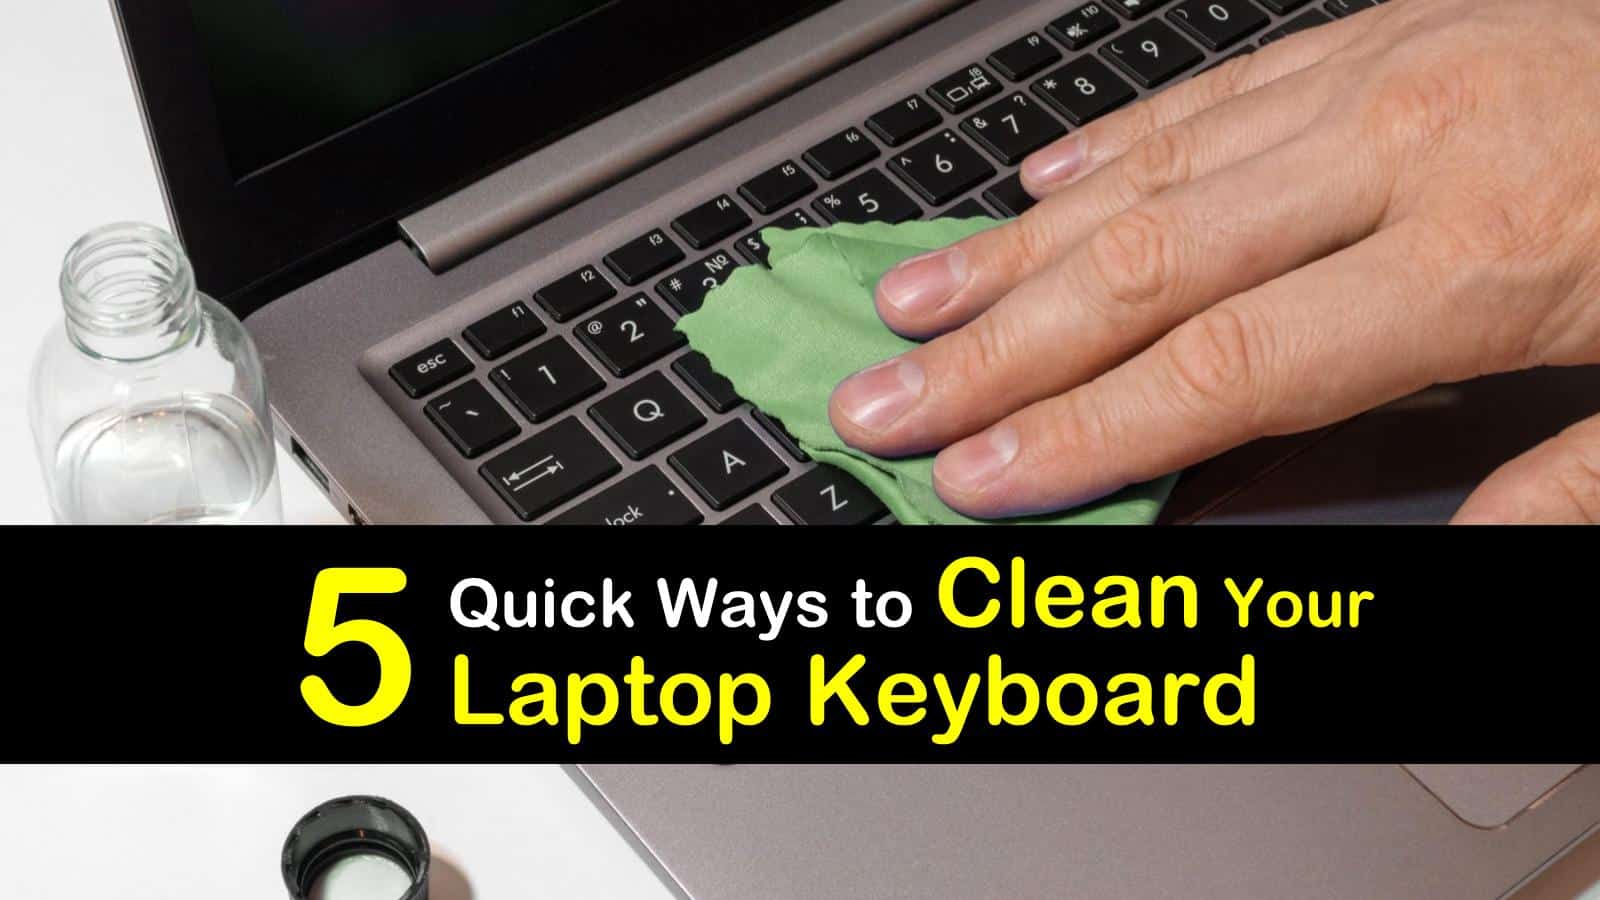 12 Quick Ways to Clean Your Laptop Keyboard